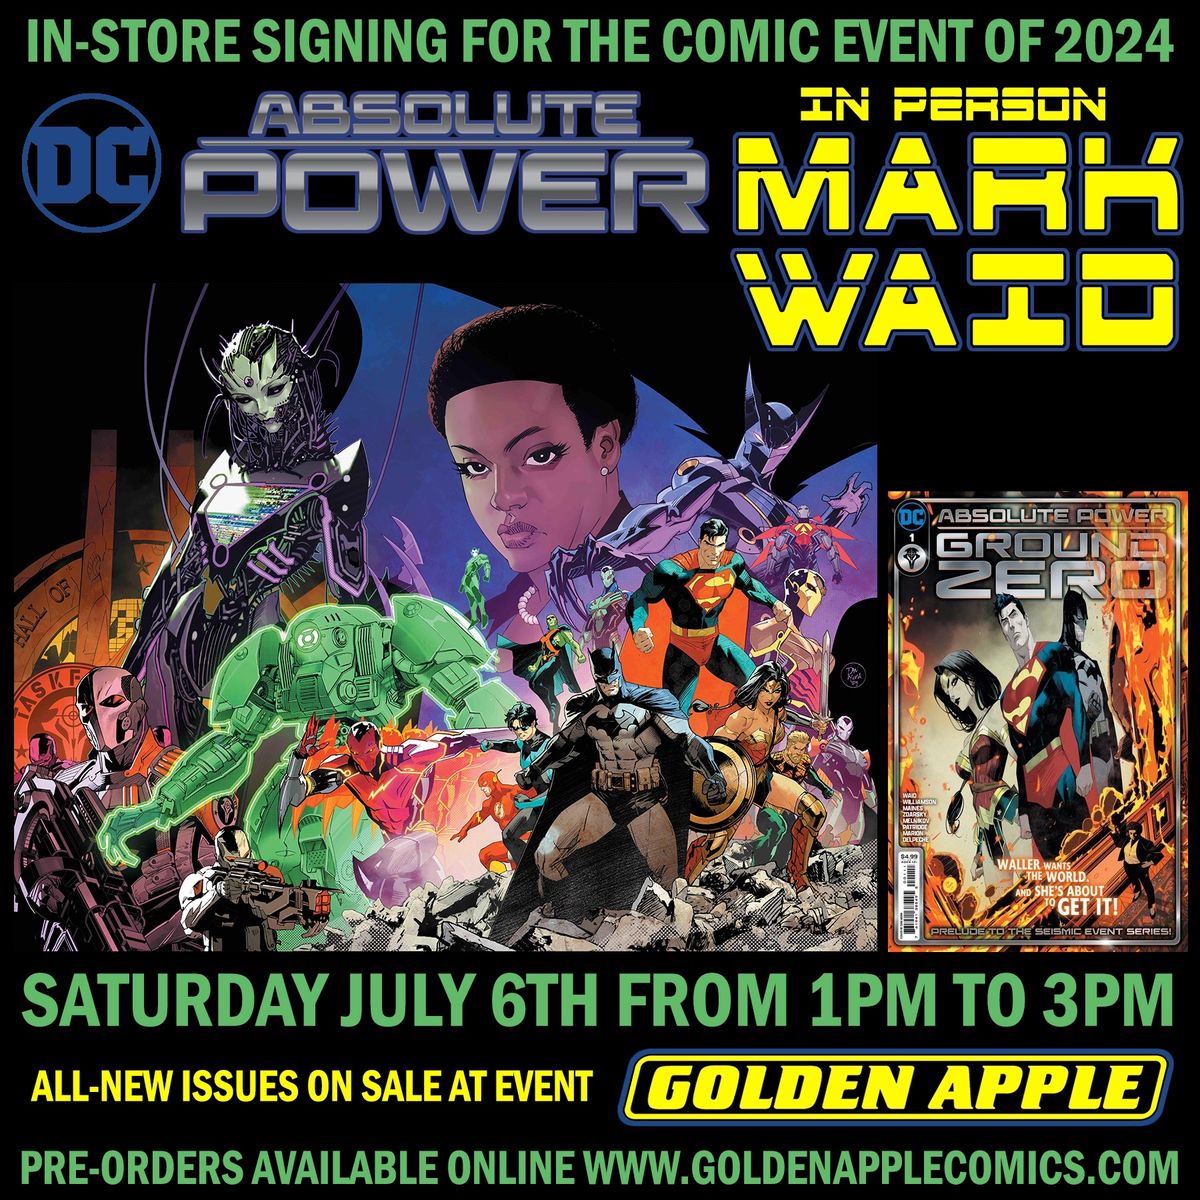 Make Waid in-store signing for DC\u2019s Absolute Power Launch